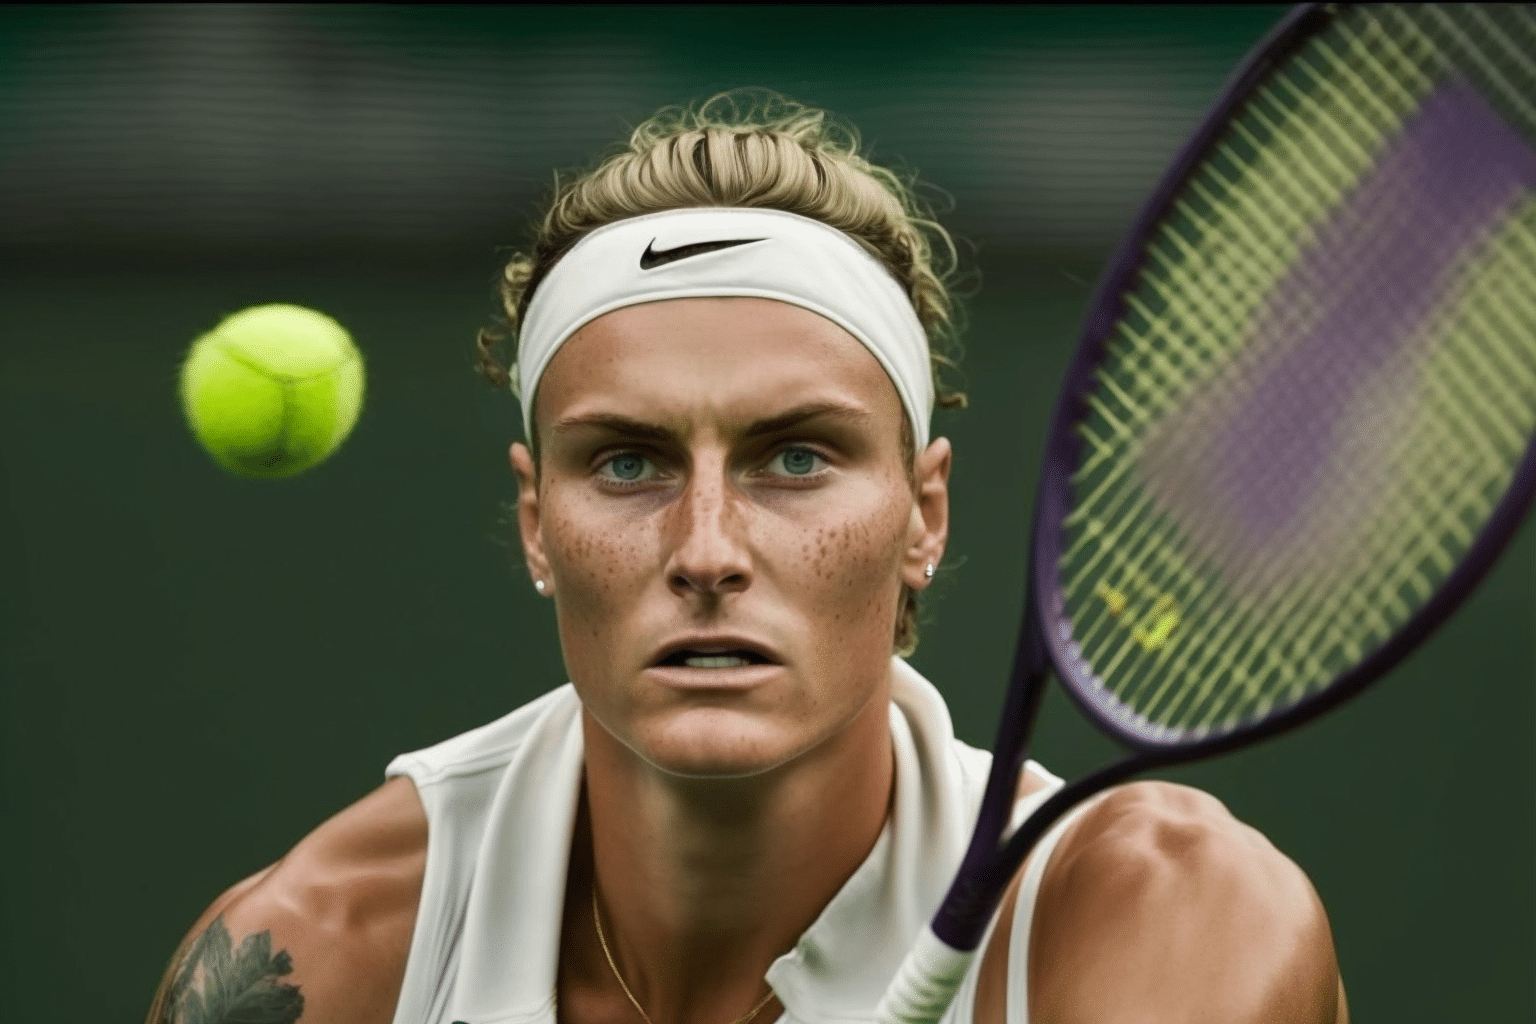 wimbledon-to-provide-accommodation-for-ukrainian-tennis-players-and-teams-during-grass-court-season